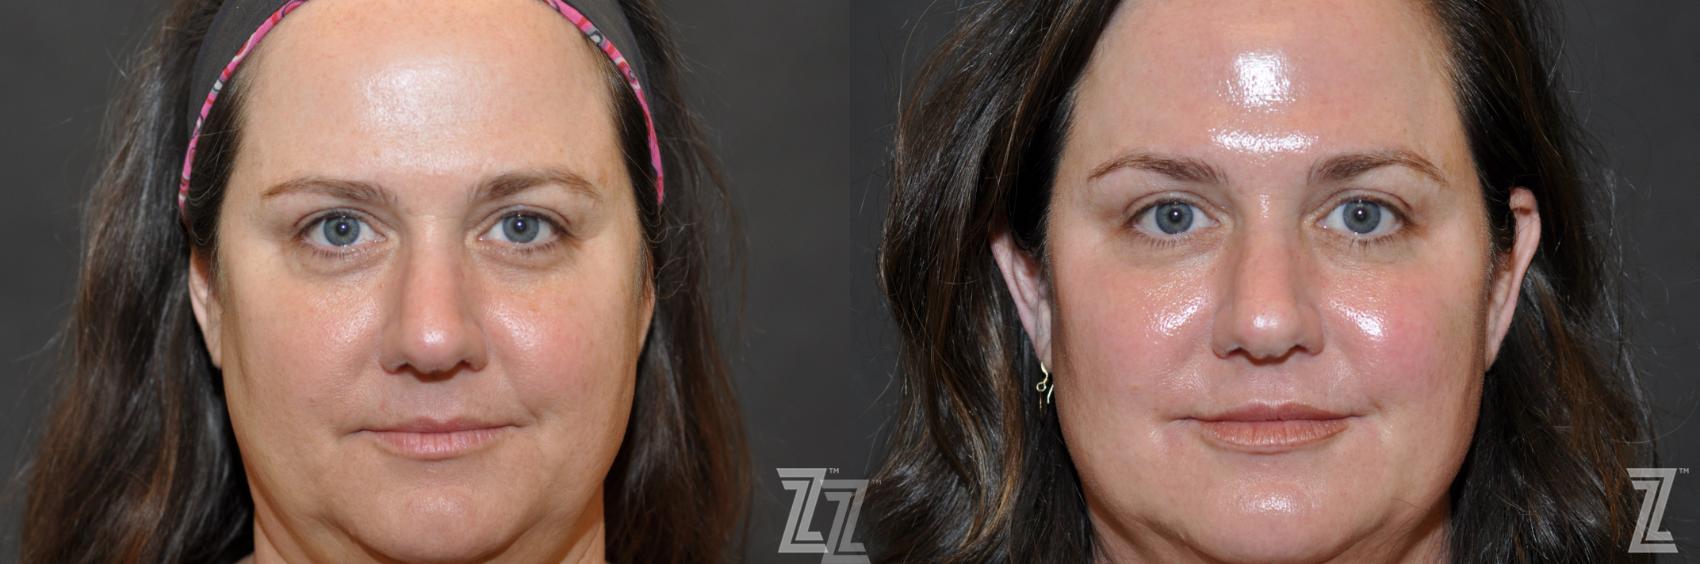 Injectable Fillers Before & After Photo | Austin, TX | The Piazza Center for Plastic Surgery & Advanced Skin Care